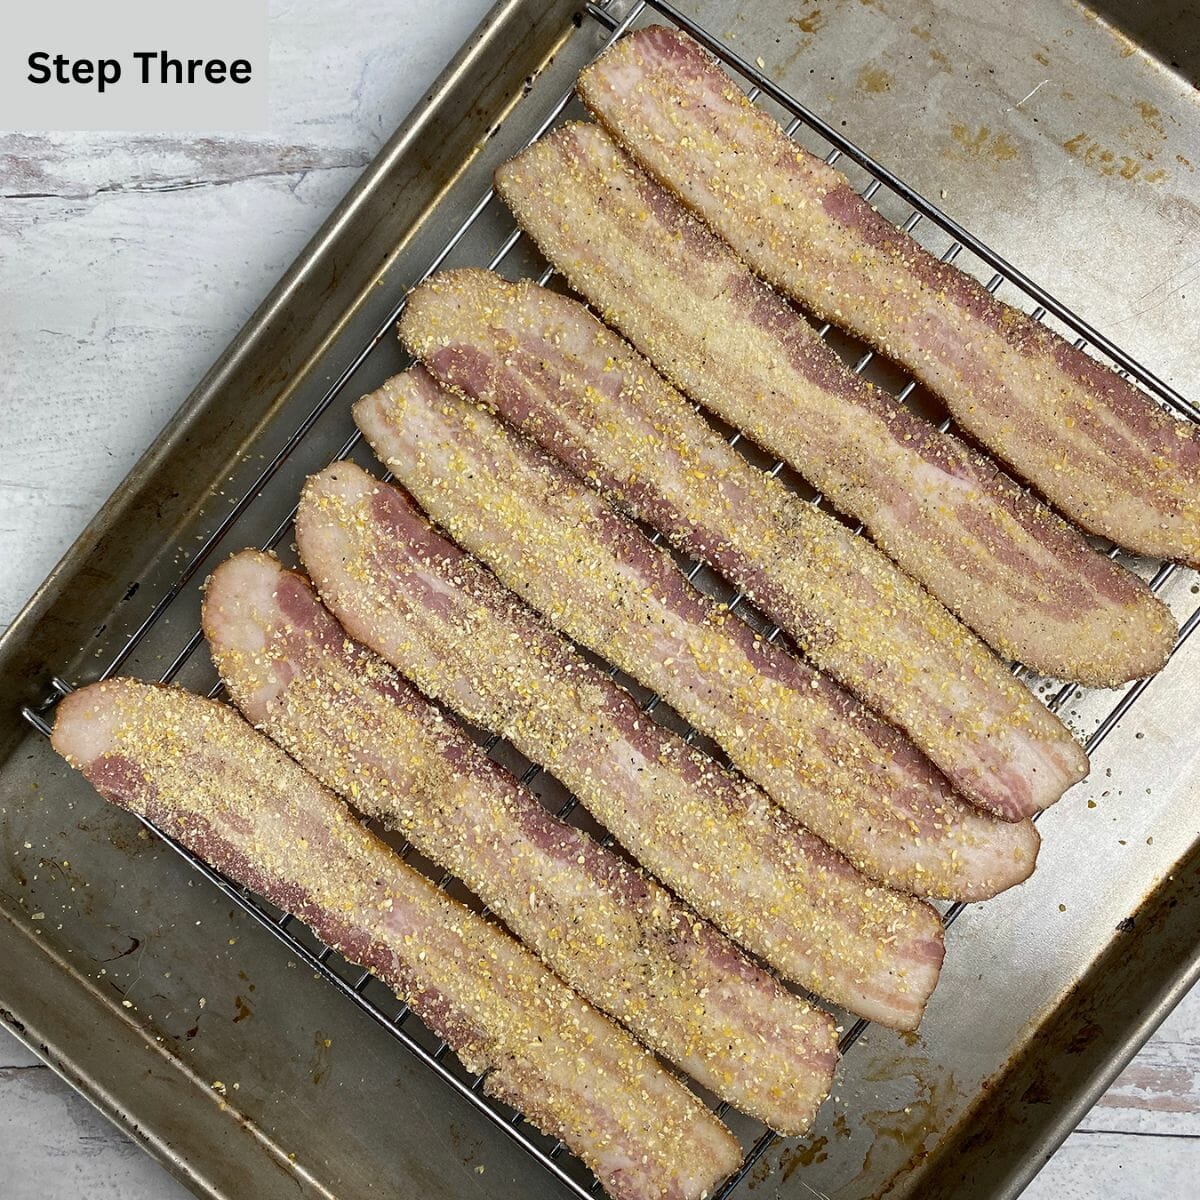 Brown sugar bacon on a rack and baking pan ready for the oven.